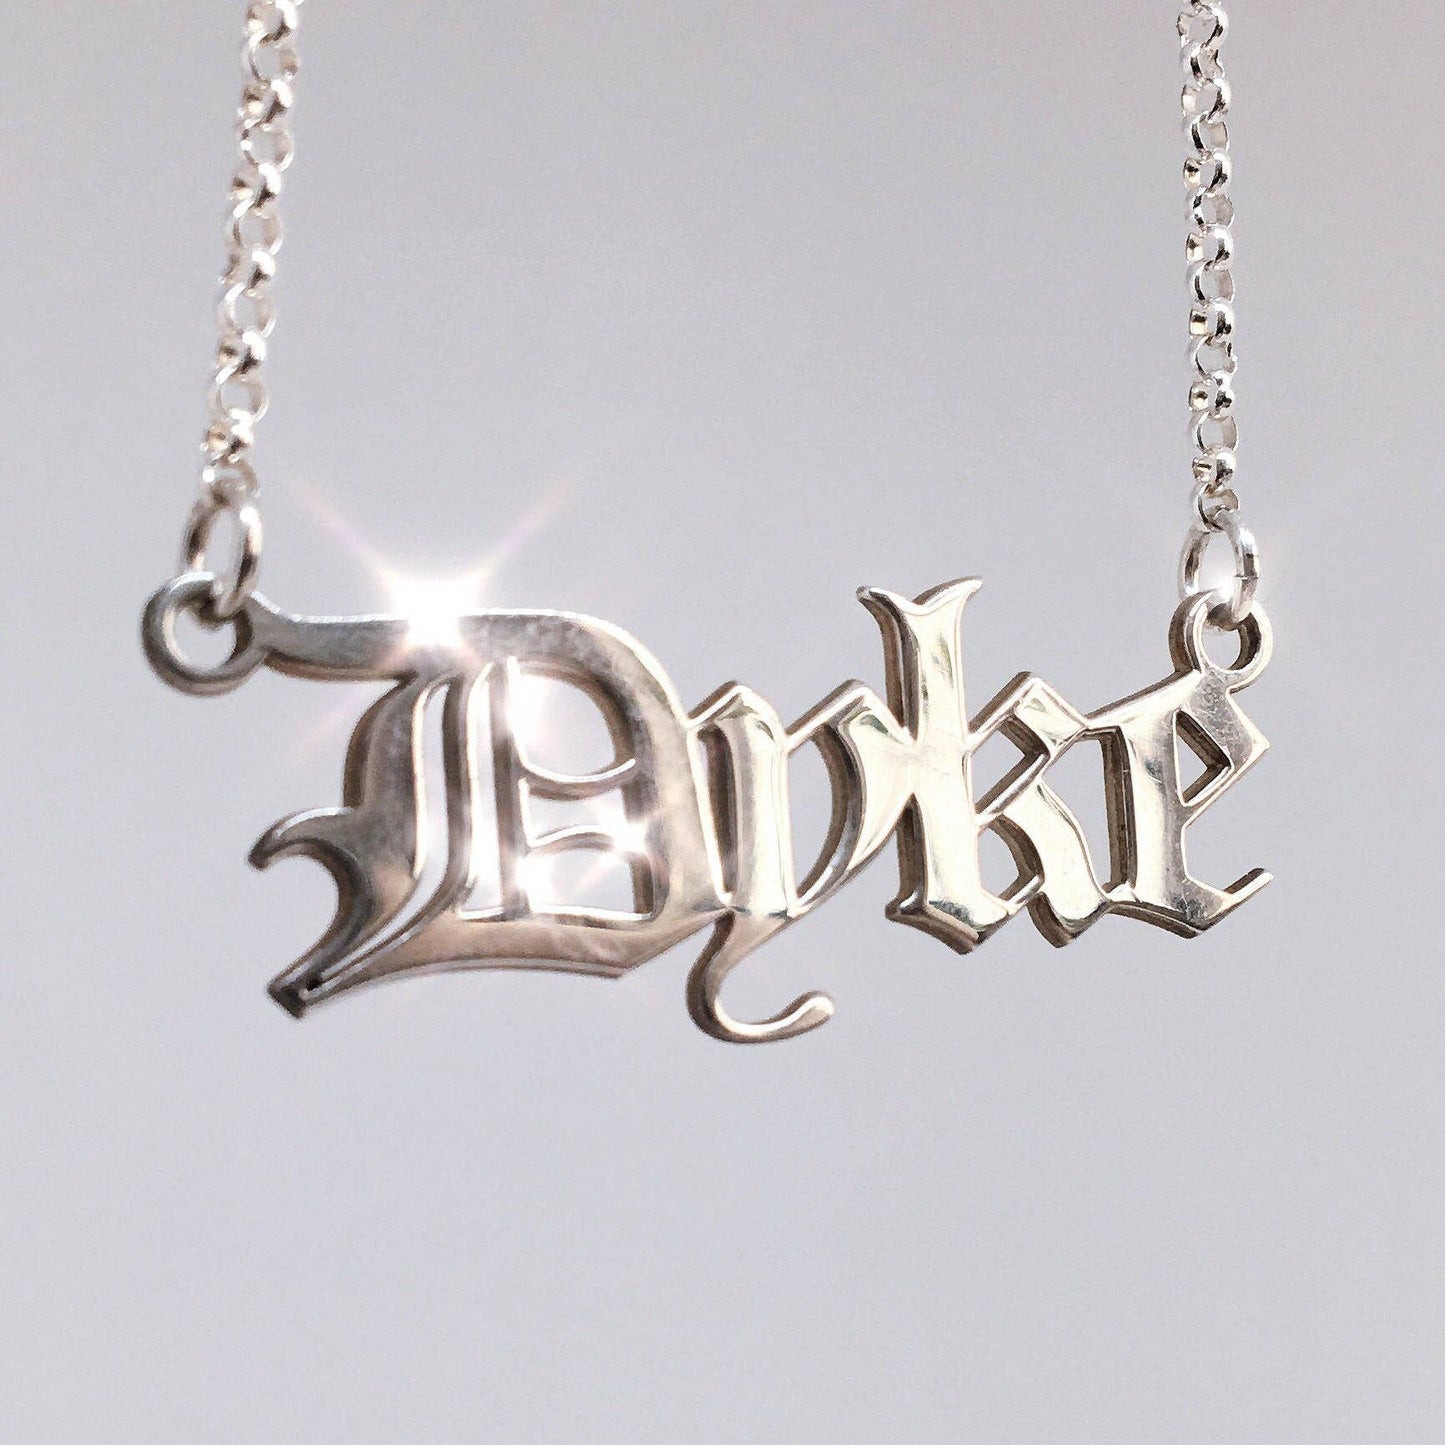 Dyke Nameplate Necklace